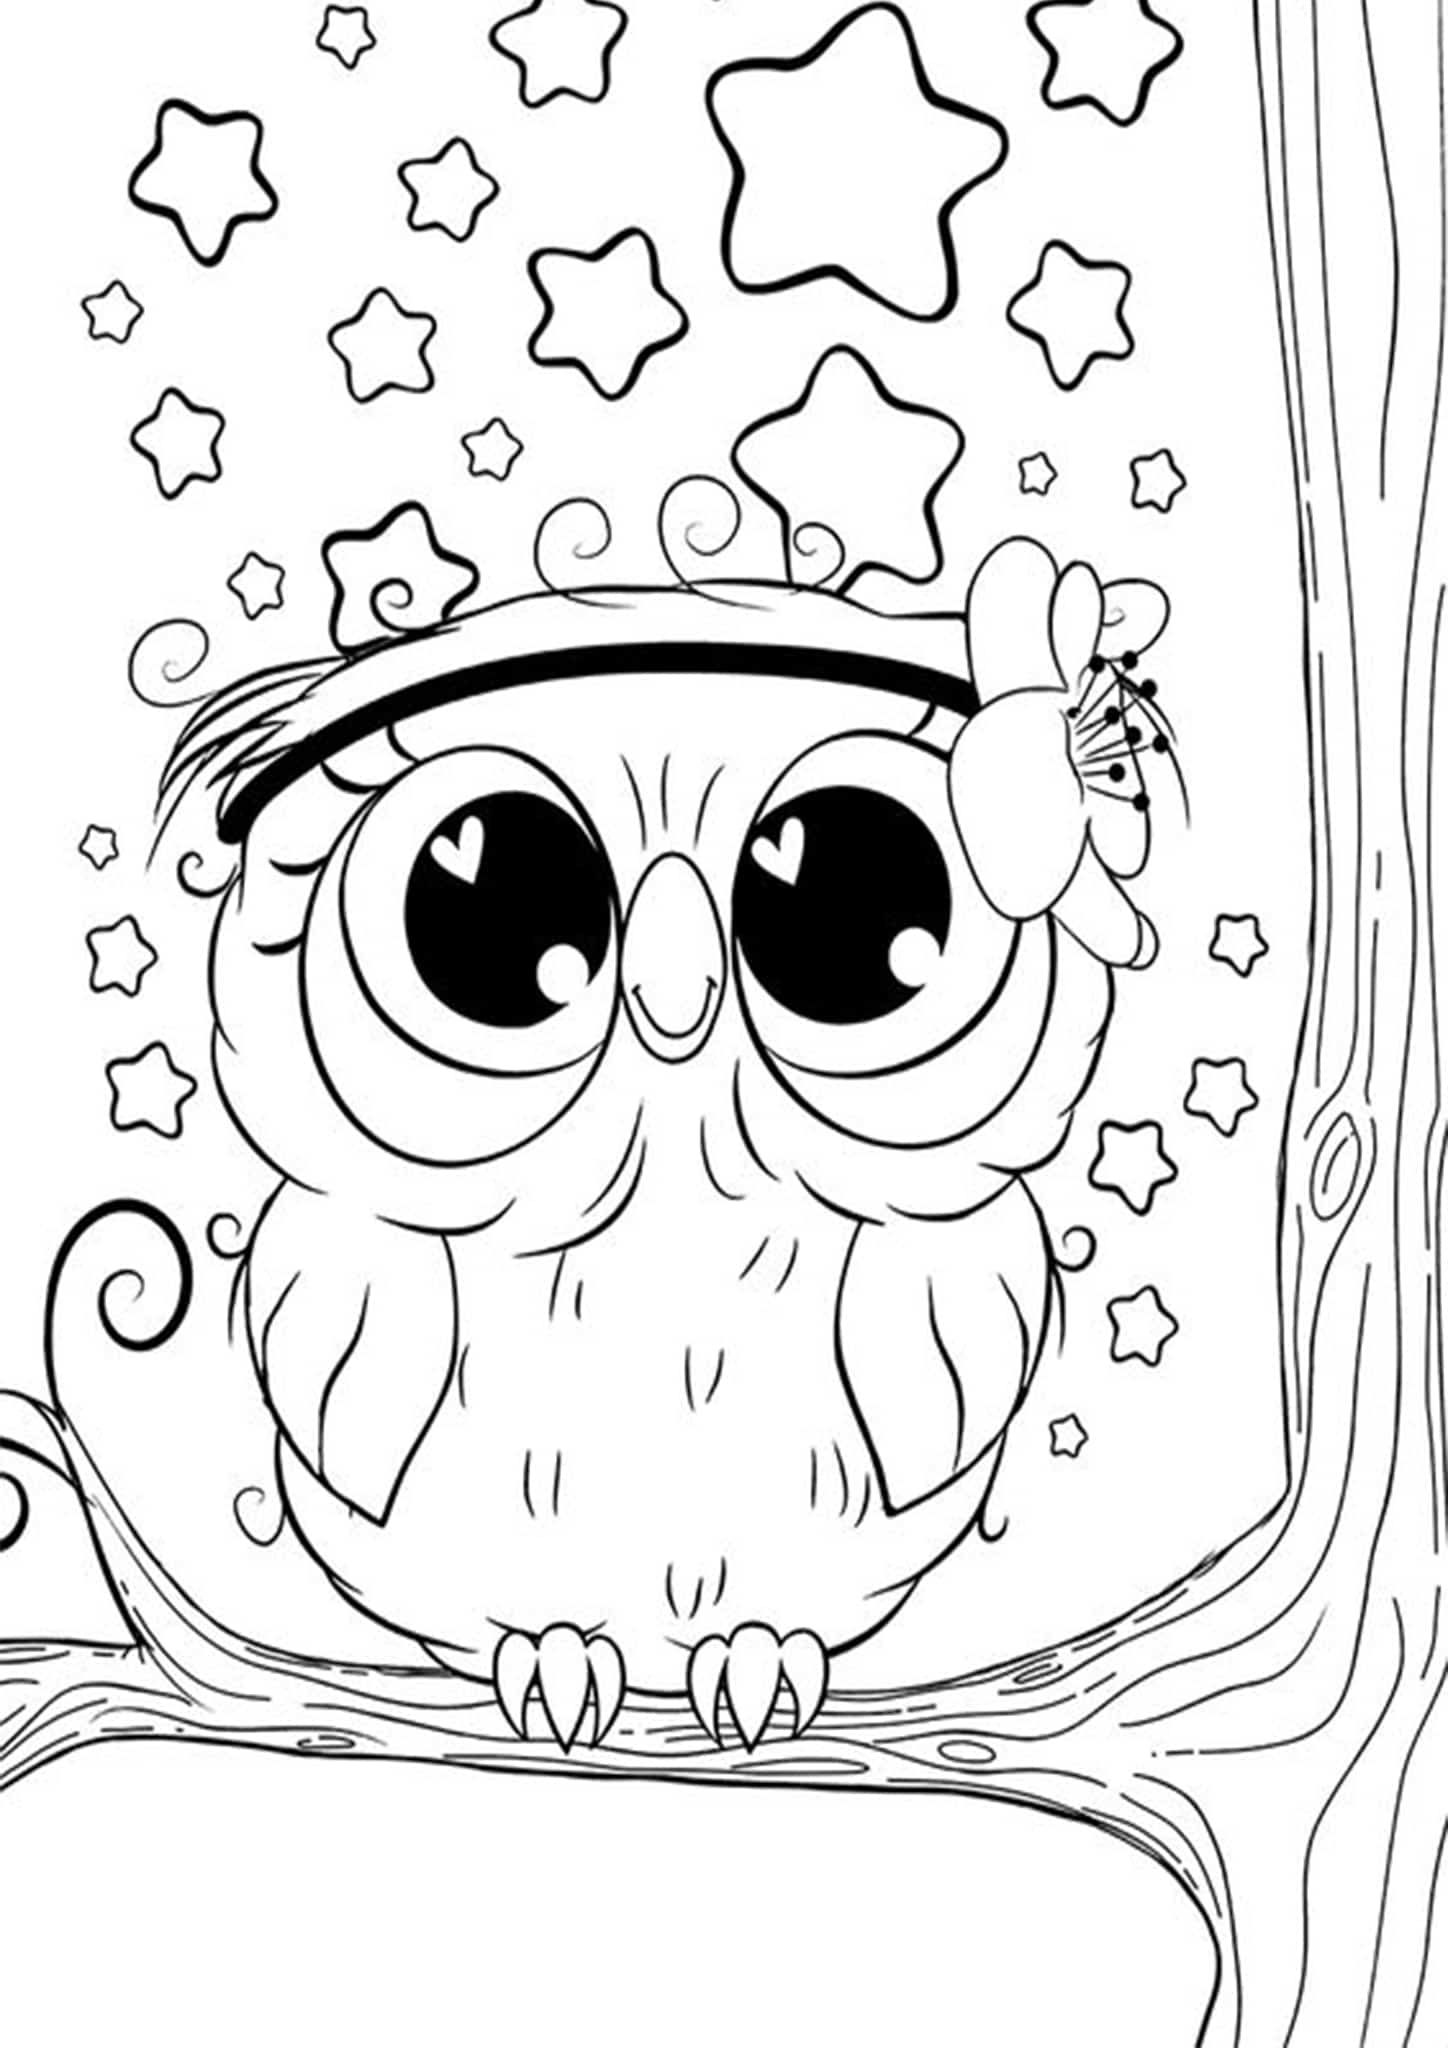 248 Cartoon Easy Owl Coloring Pages for Adult